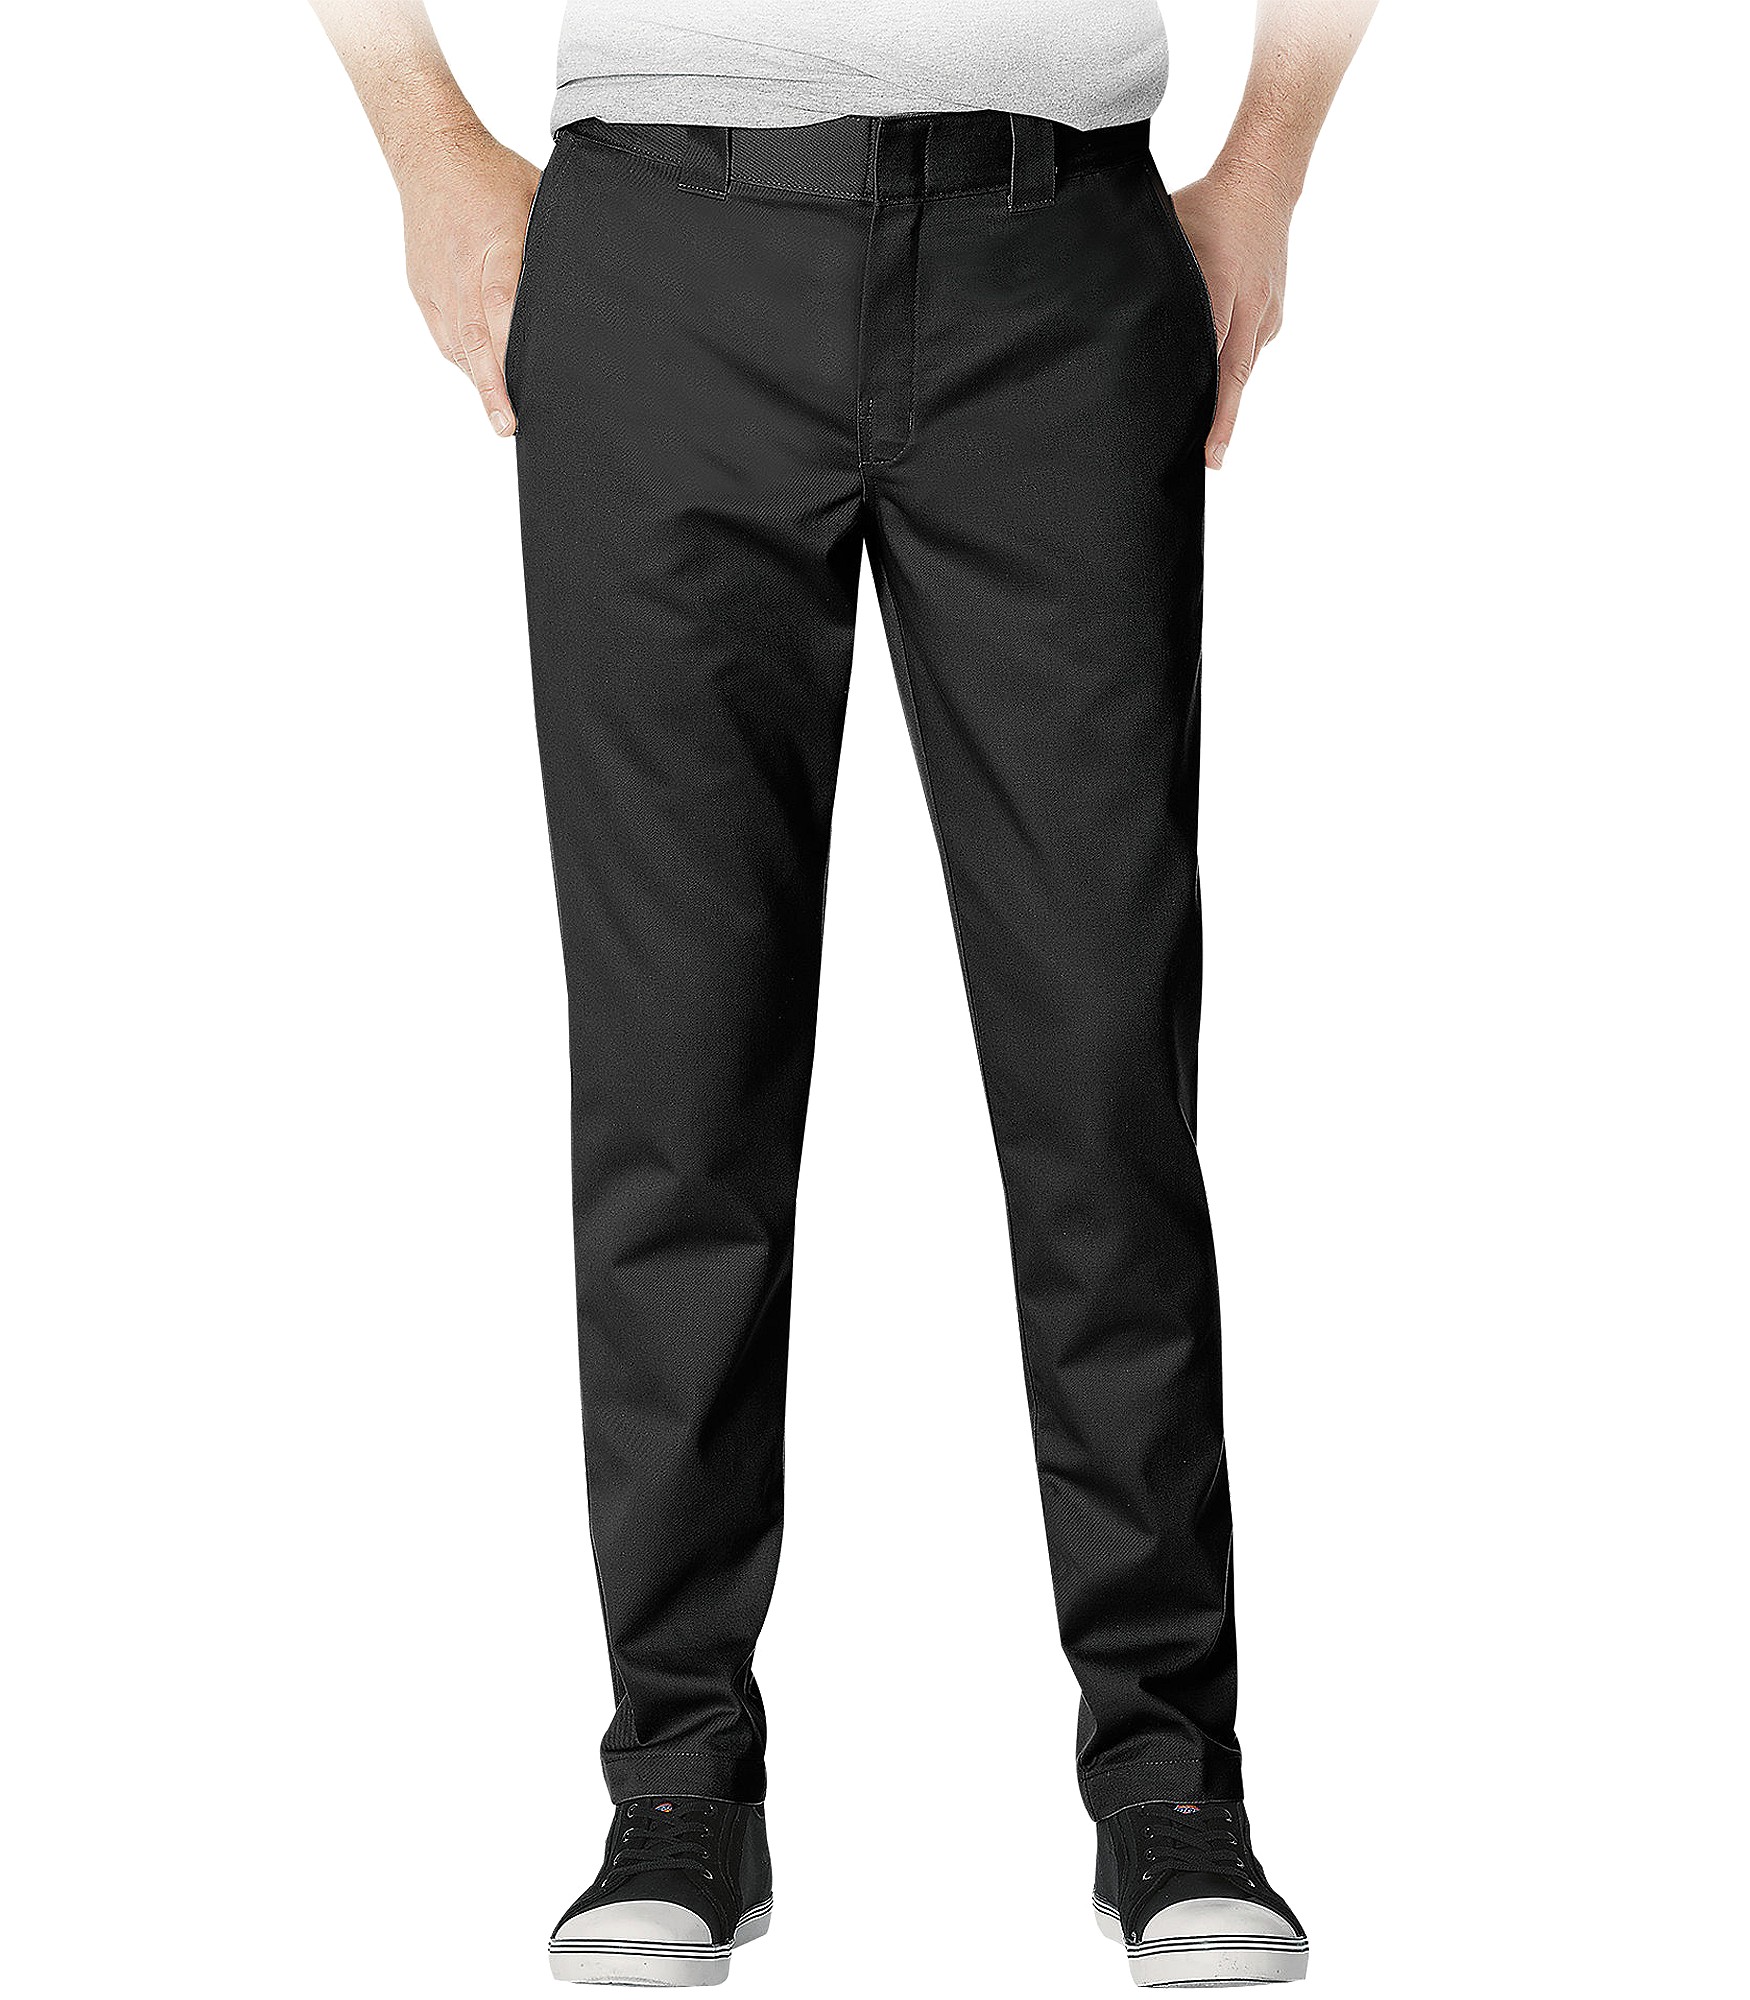 tapered leg work trousers